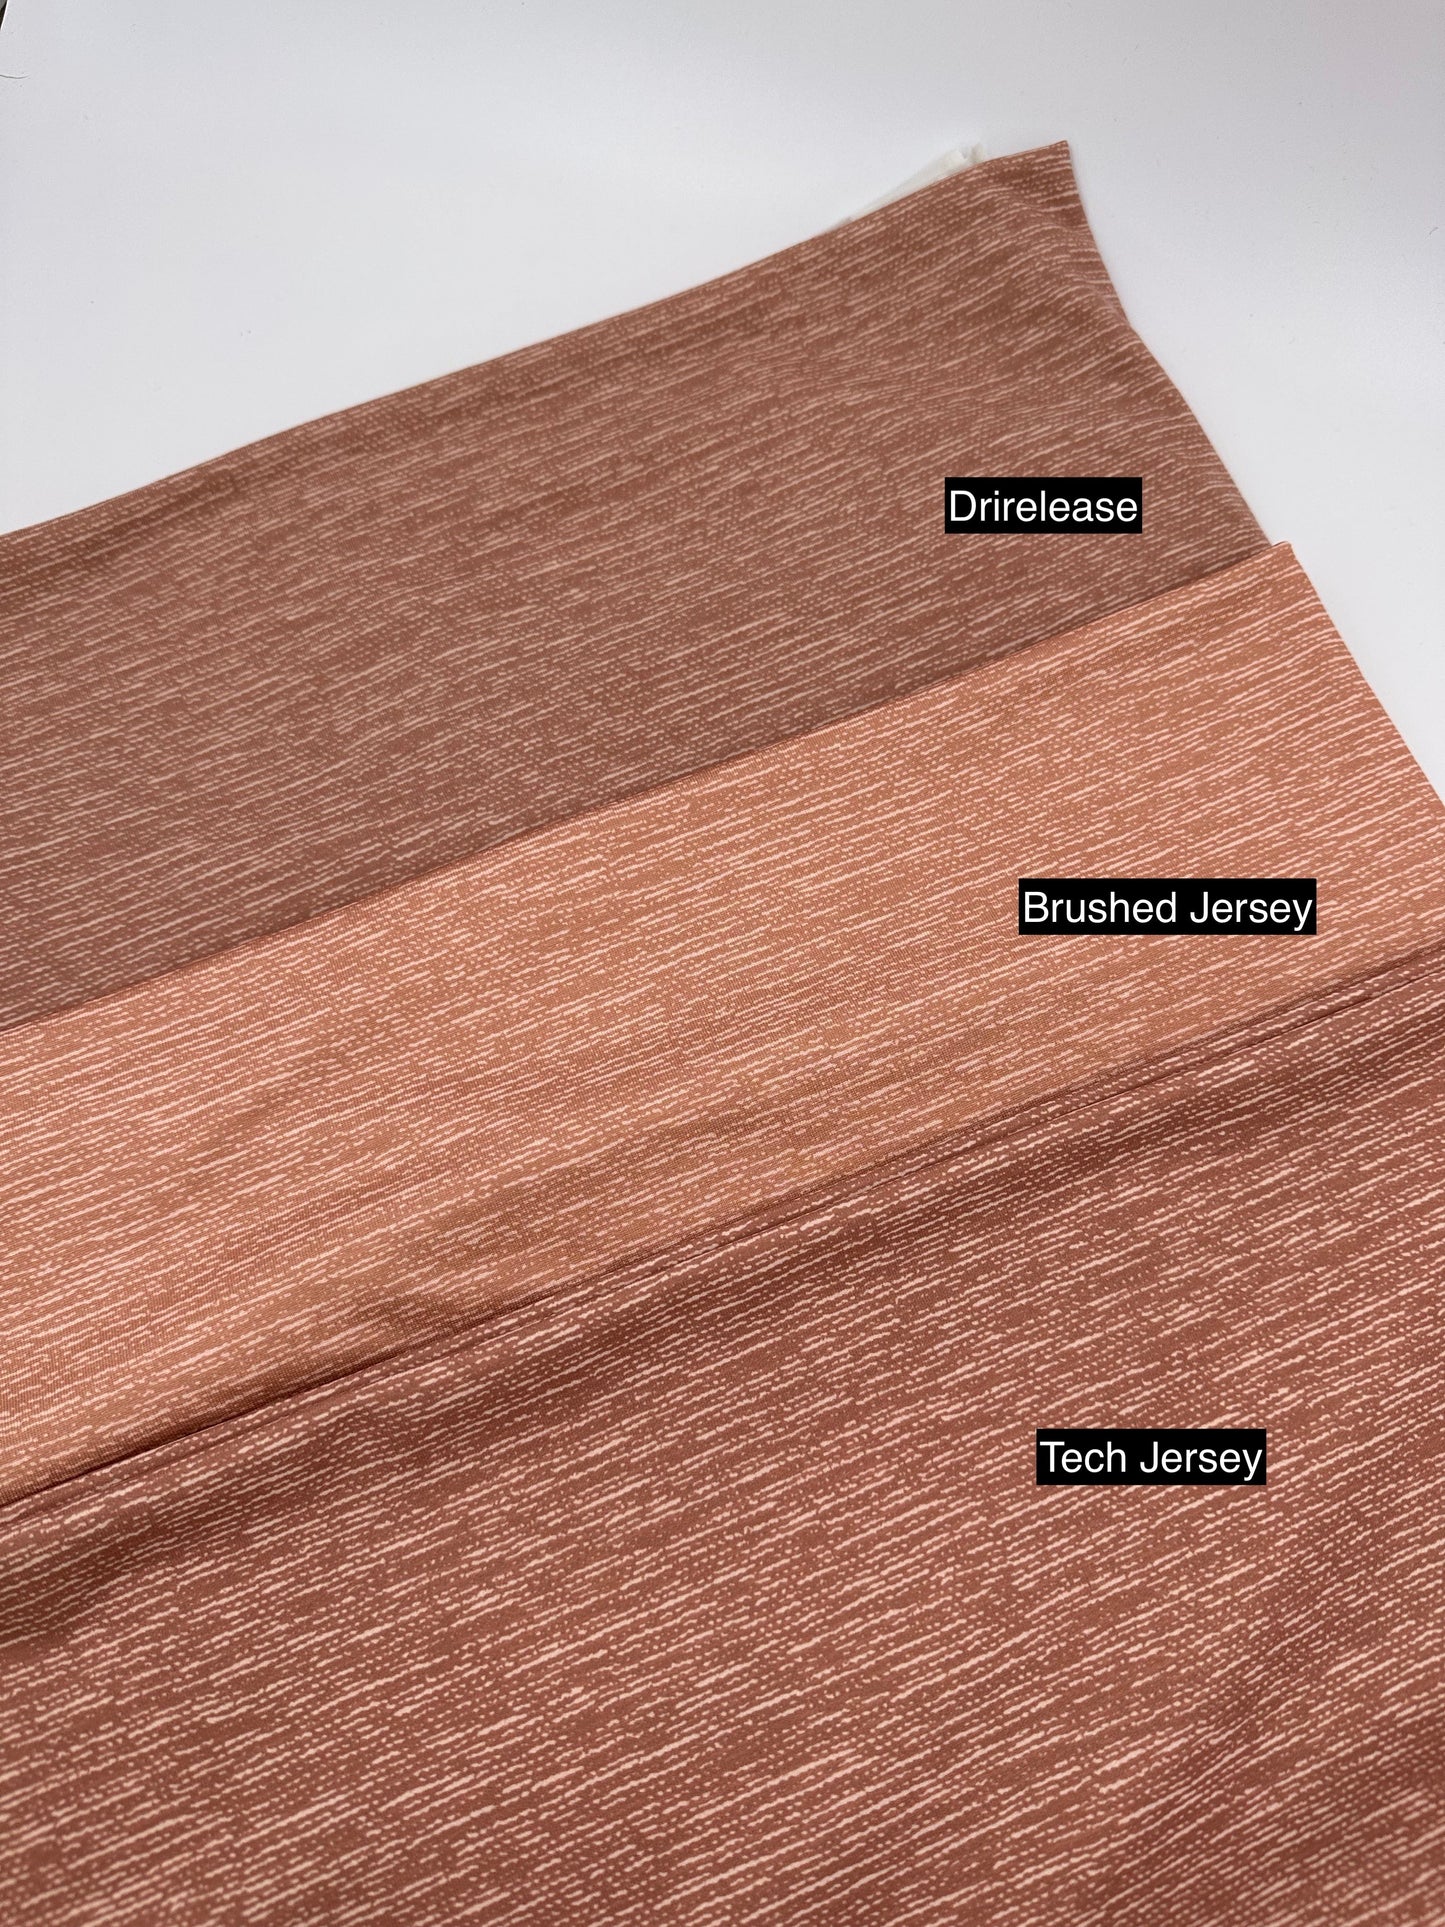 Drirelease: Rose Gold Printed Woven Texture